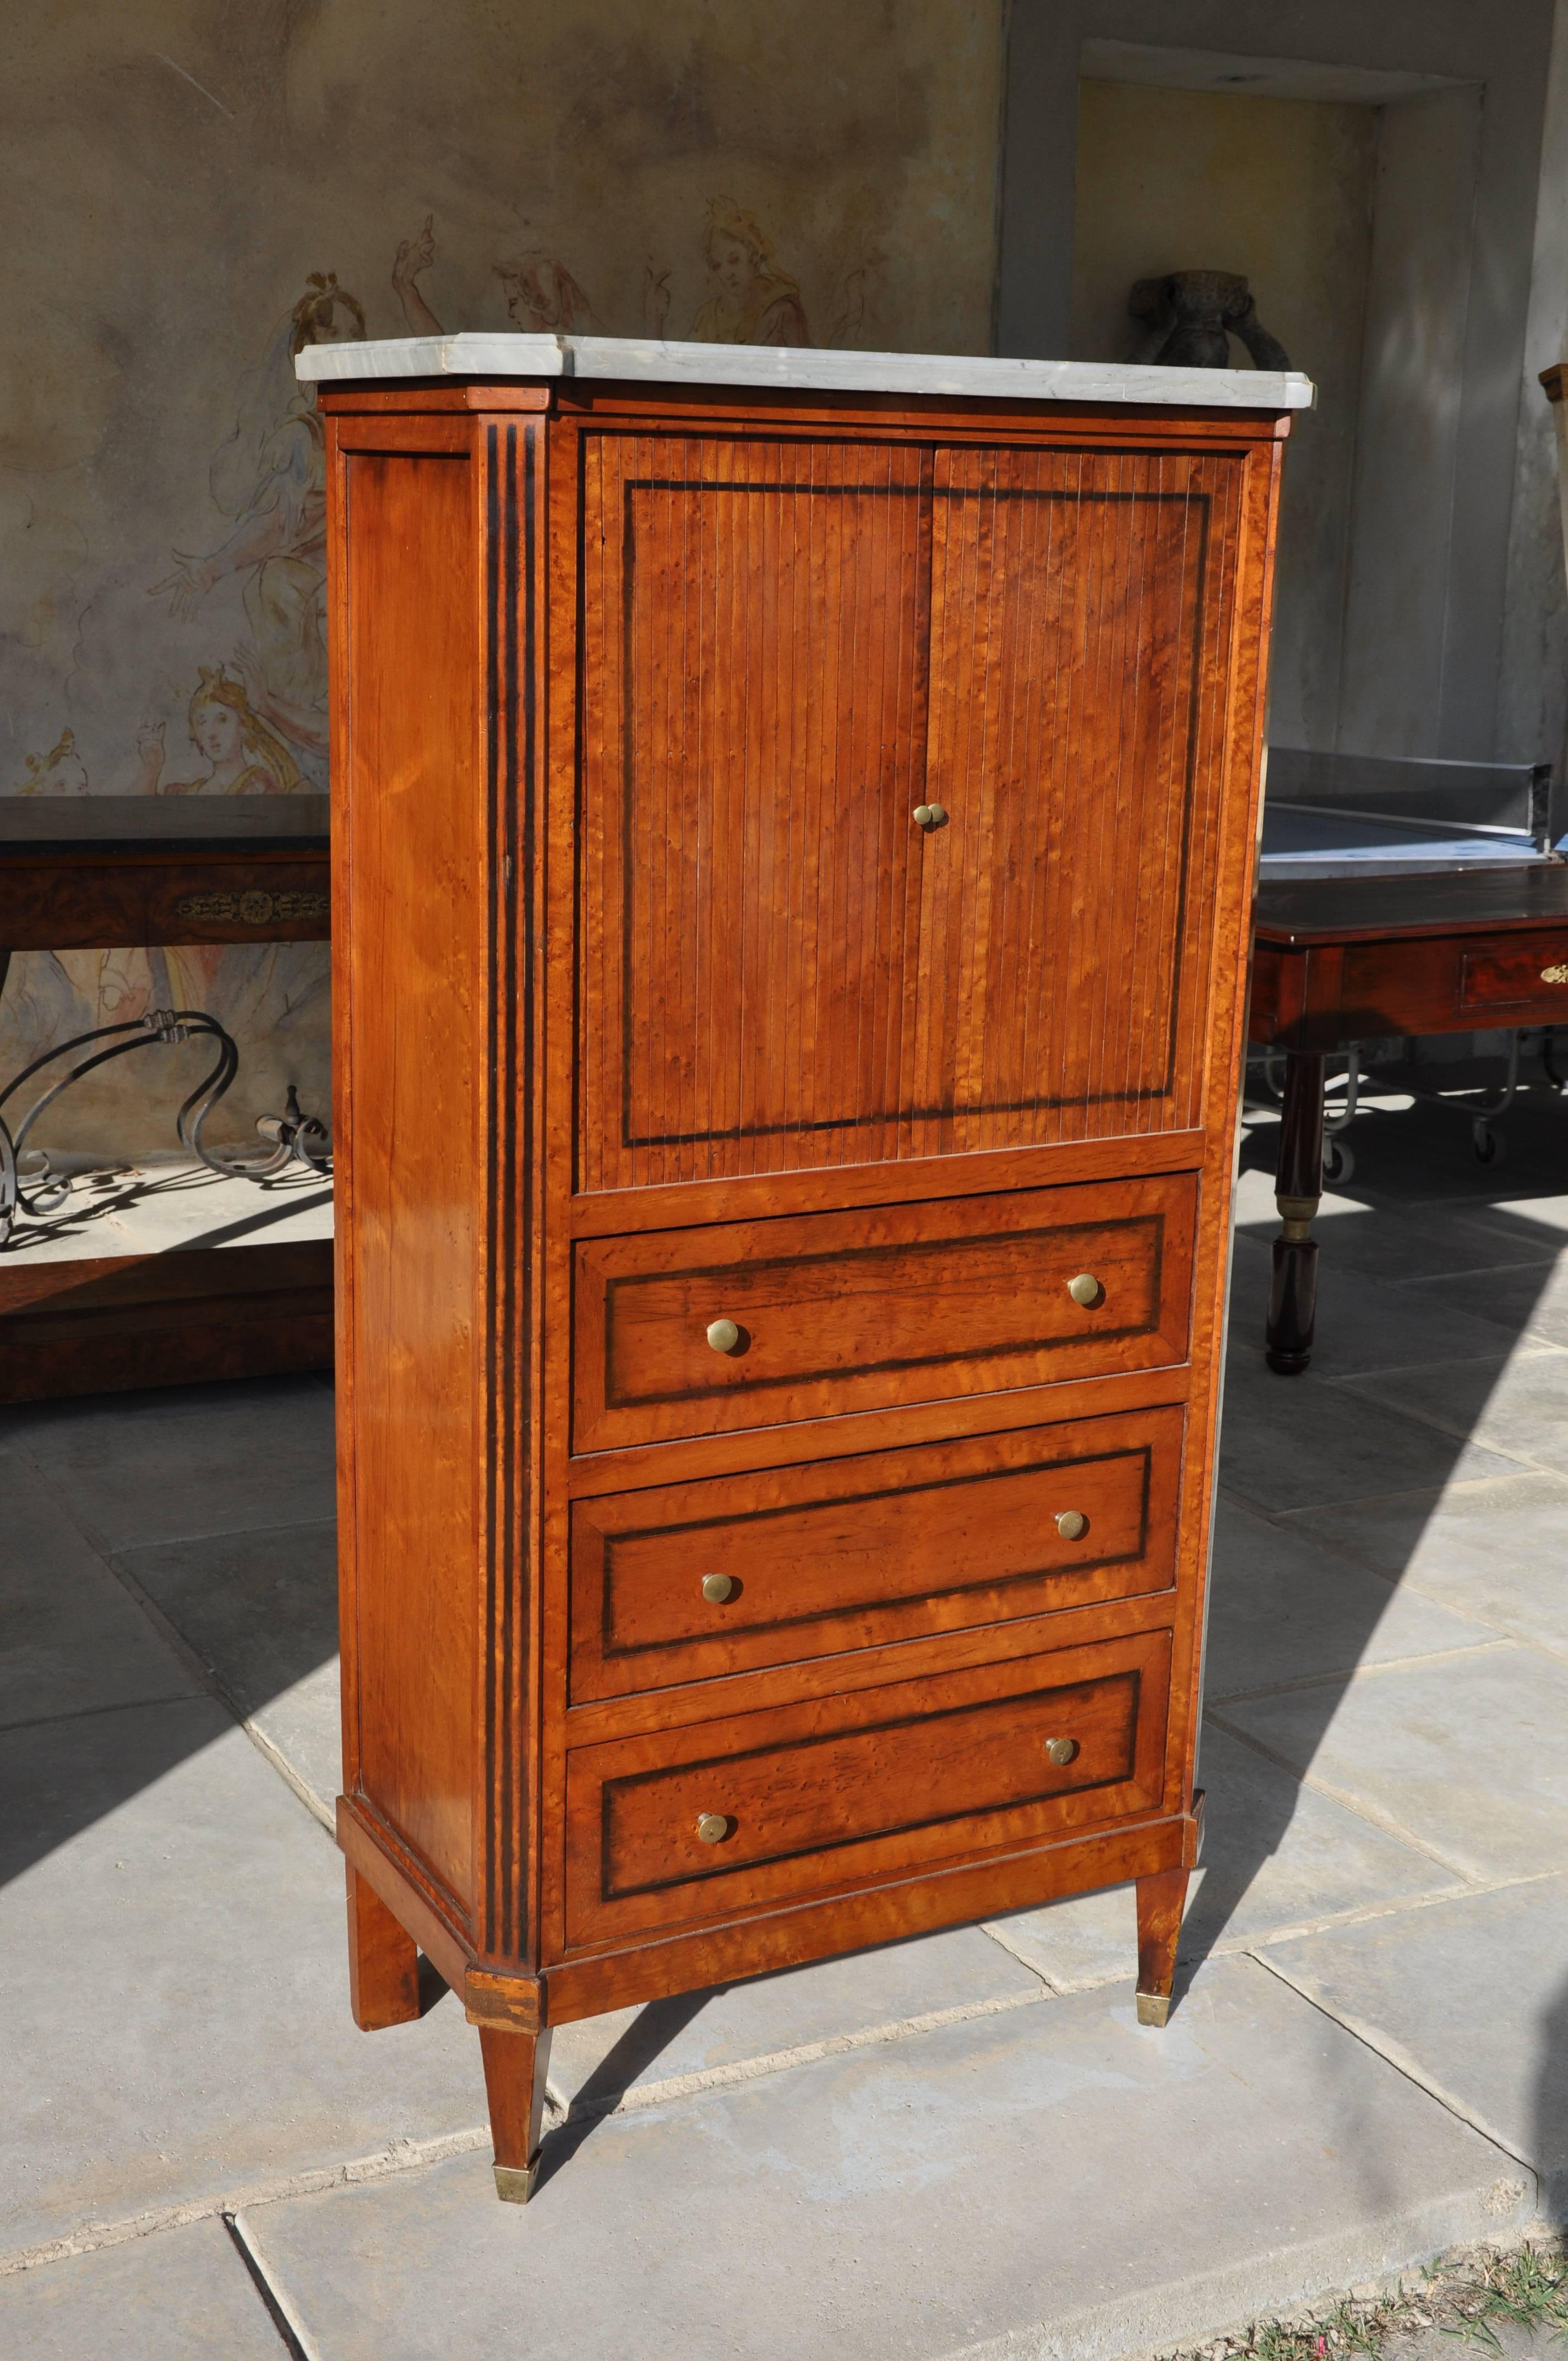 Walnut cabinet with top in Belgian grey marble. The upper part has an unusual opening with shutters, while the bottom part has three drawers. It was made in 19th century, circa 1800-1820
Size 75 x 39cm, height 144 cm.